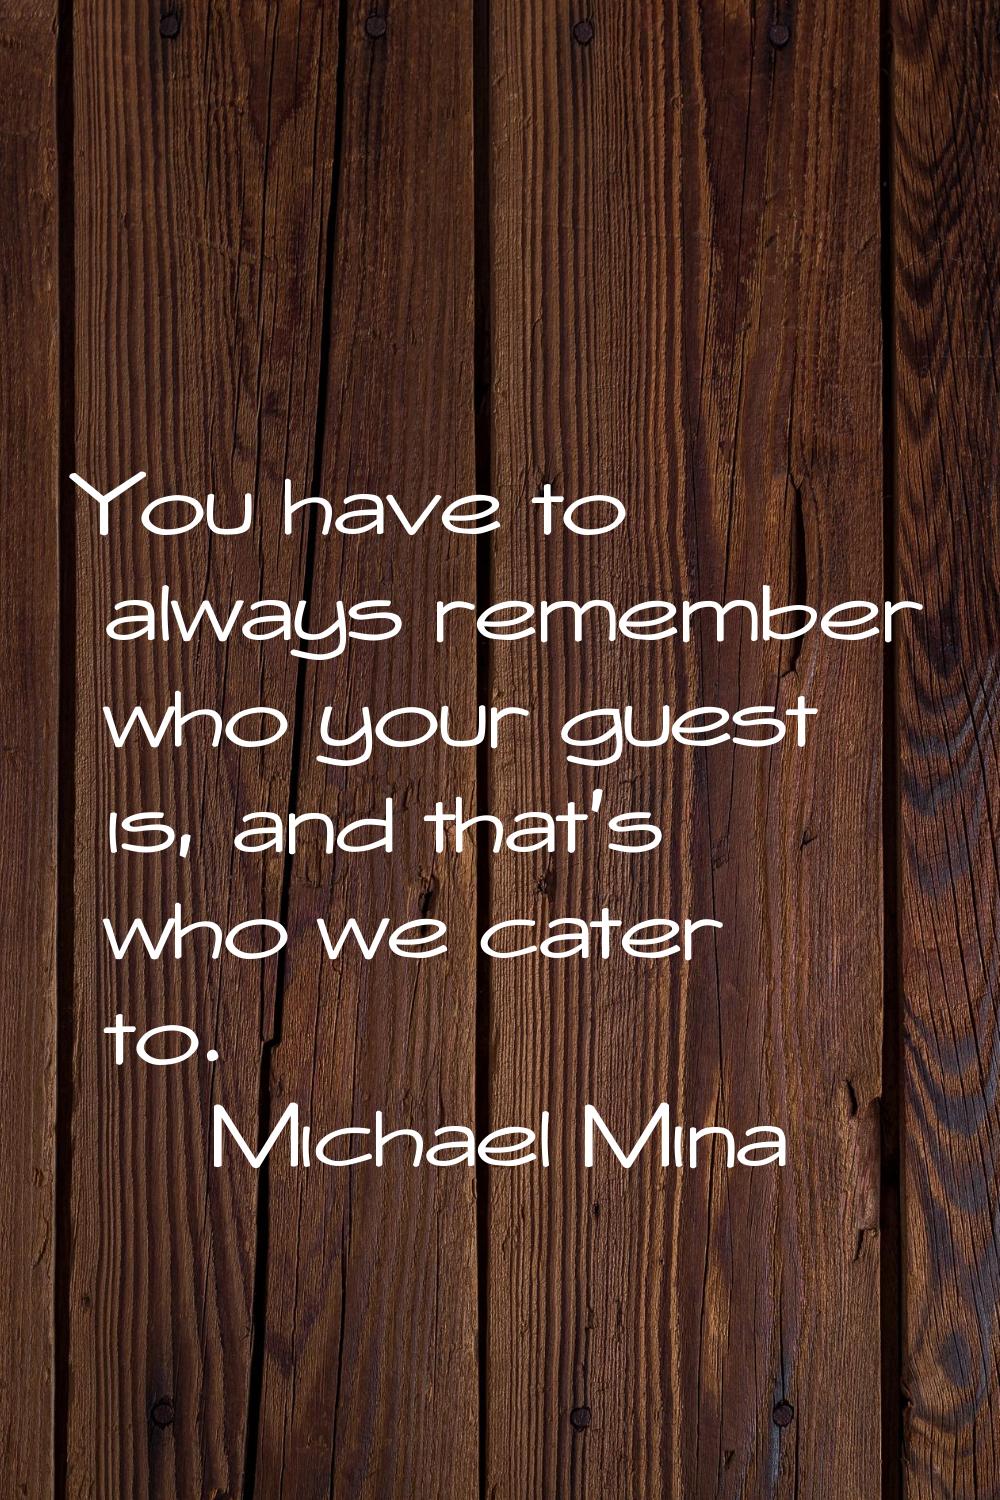 You have to always remember who your guest is, and that's who we cater to.